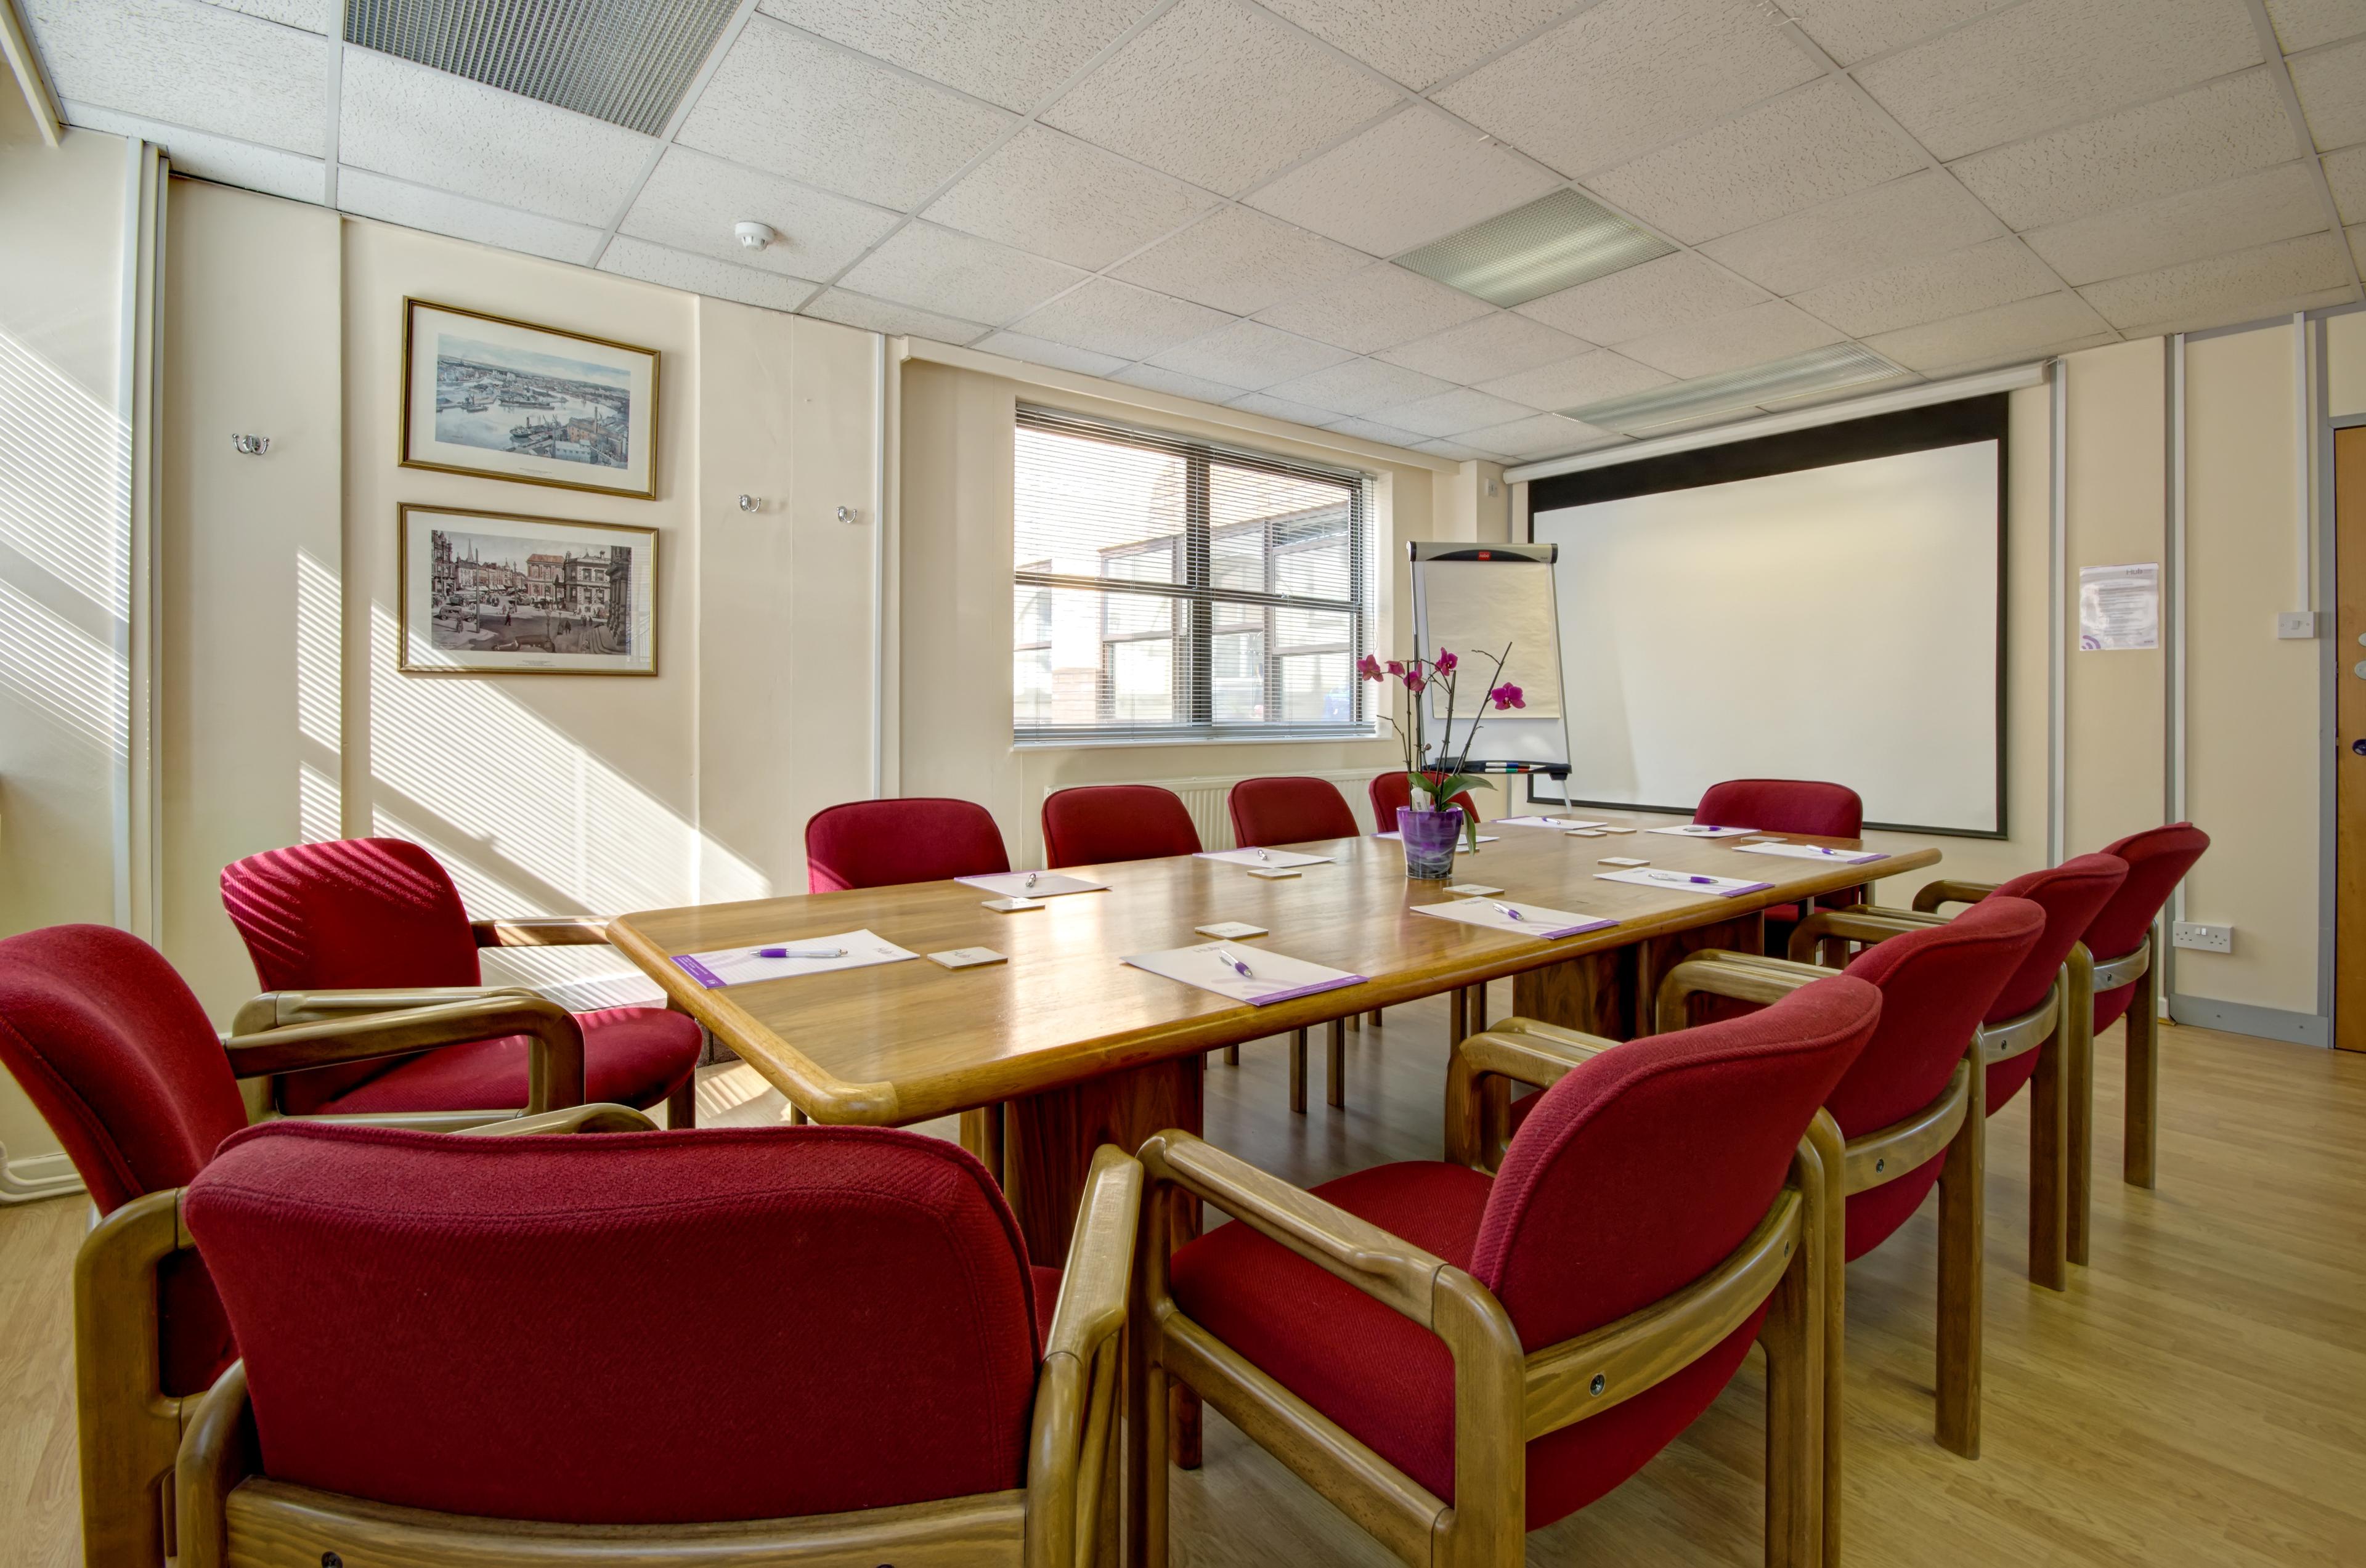 First Floor Conference Room, The Hub Business Centre Ipswich Ltd photo #2